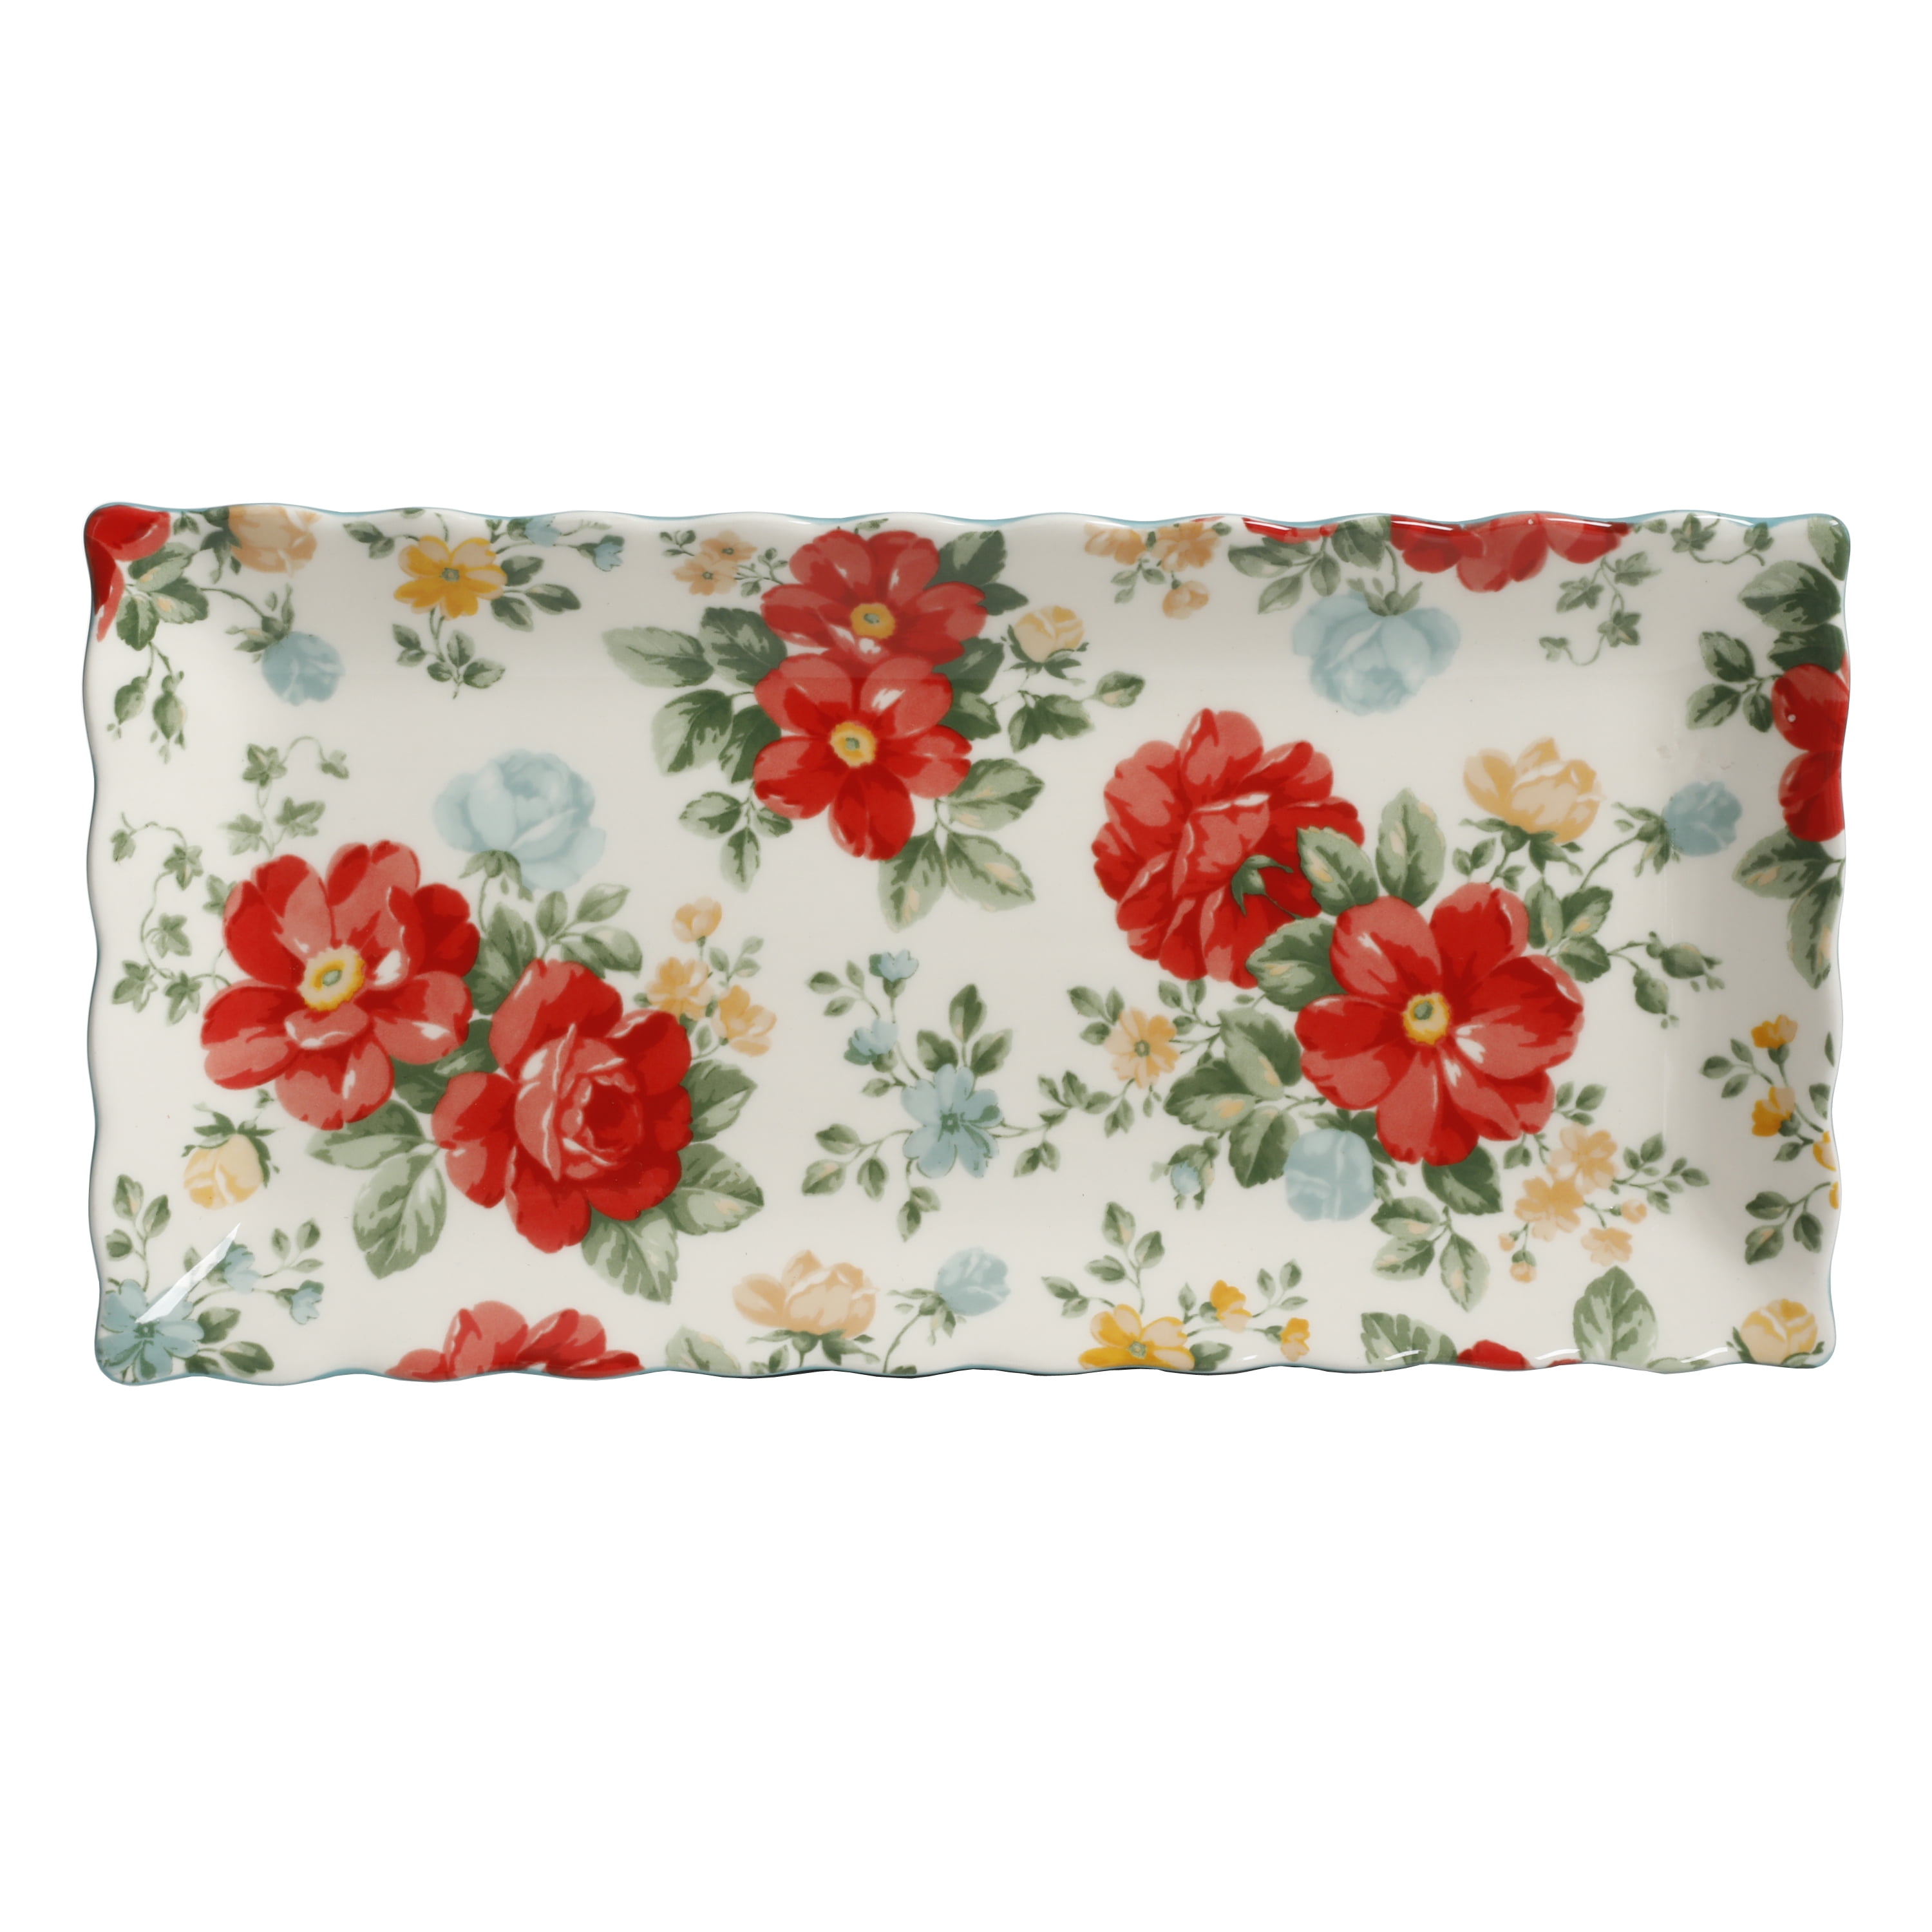 Details about   Pioneer Woman Floral Medley 3-Piece Serve Tray Set 